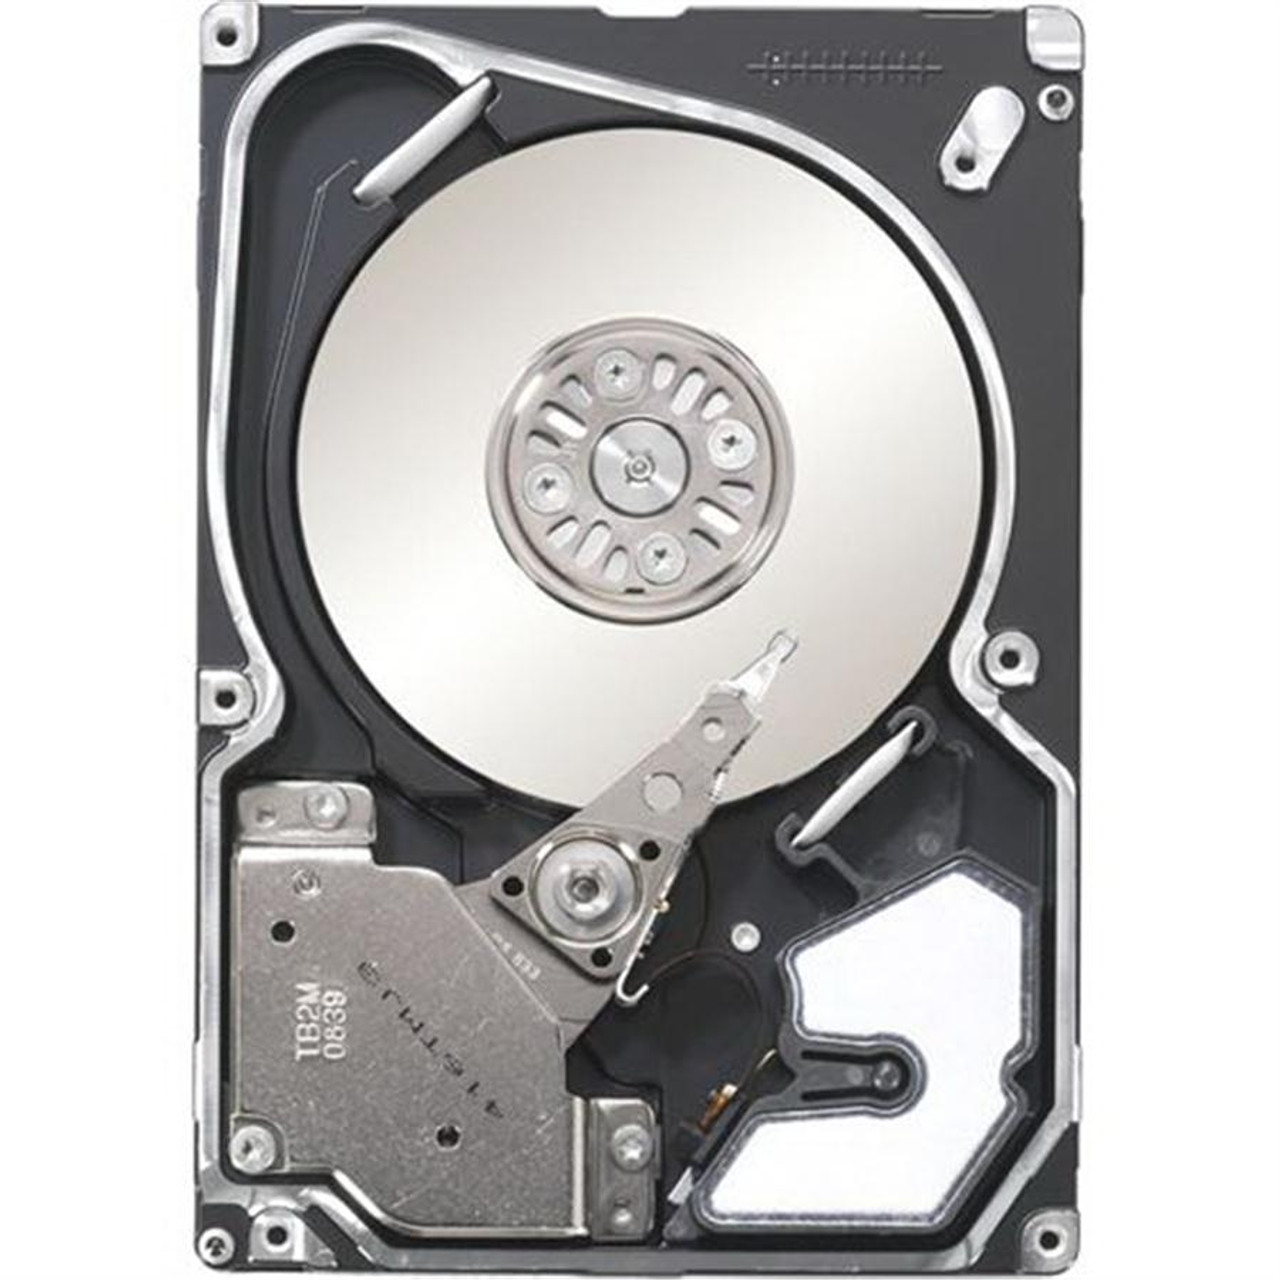 9SW066-150 - Seagate 300GB 15000RPM SAS 6.0Gbps 64MB Cache 2.5-inch Hard Drive